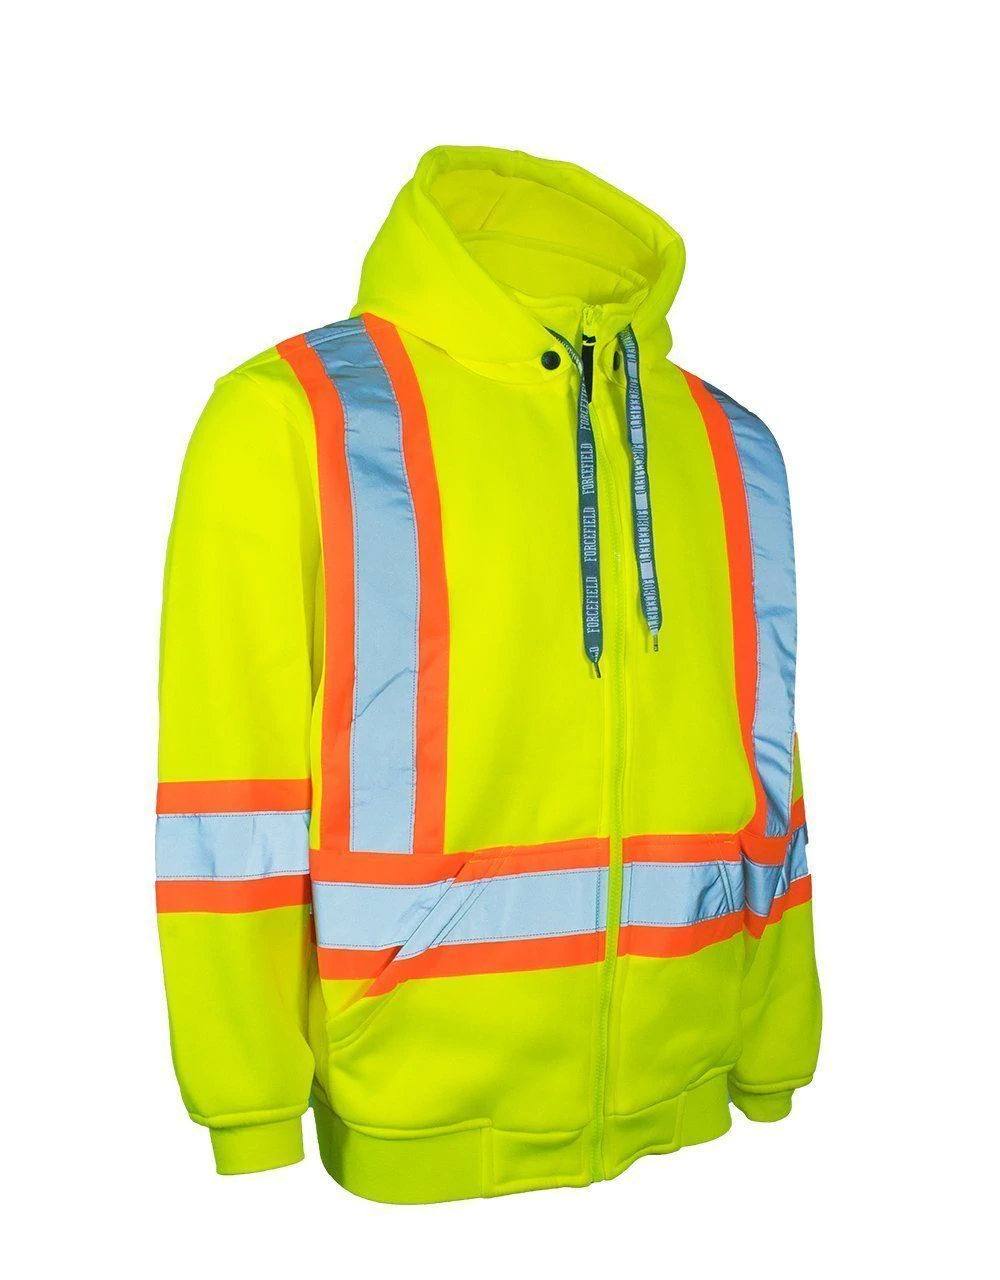 Industrial Workwear - Bangladesh Factory, Suppliers, Manufacturers